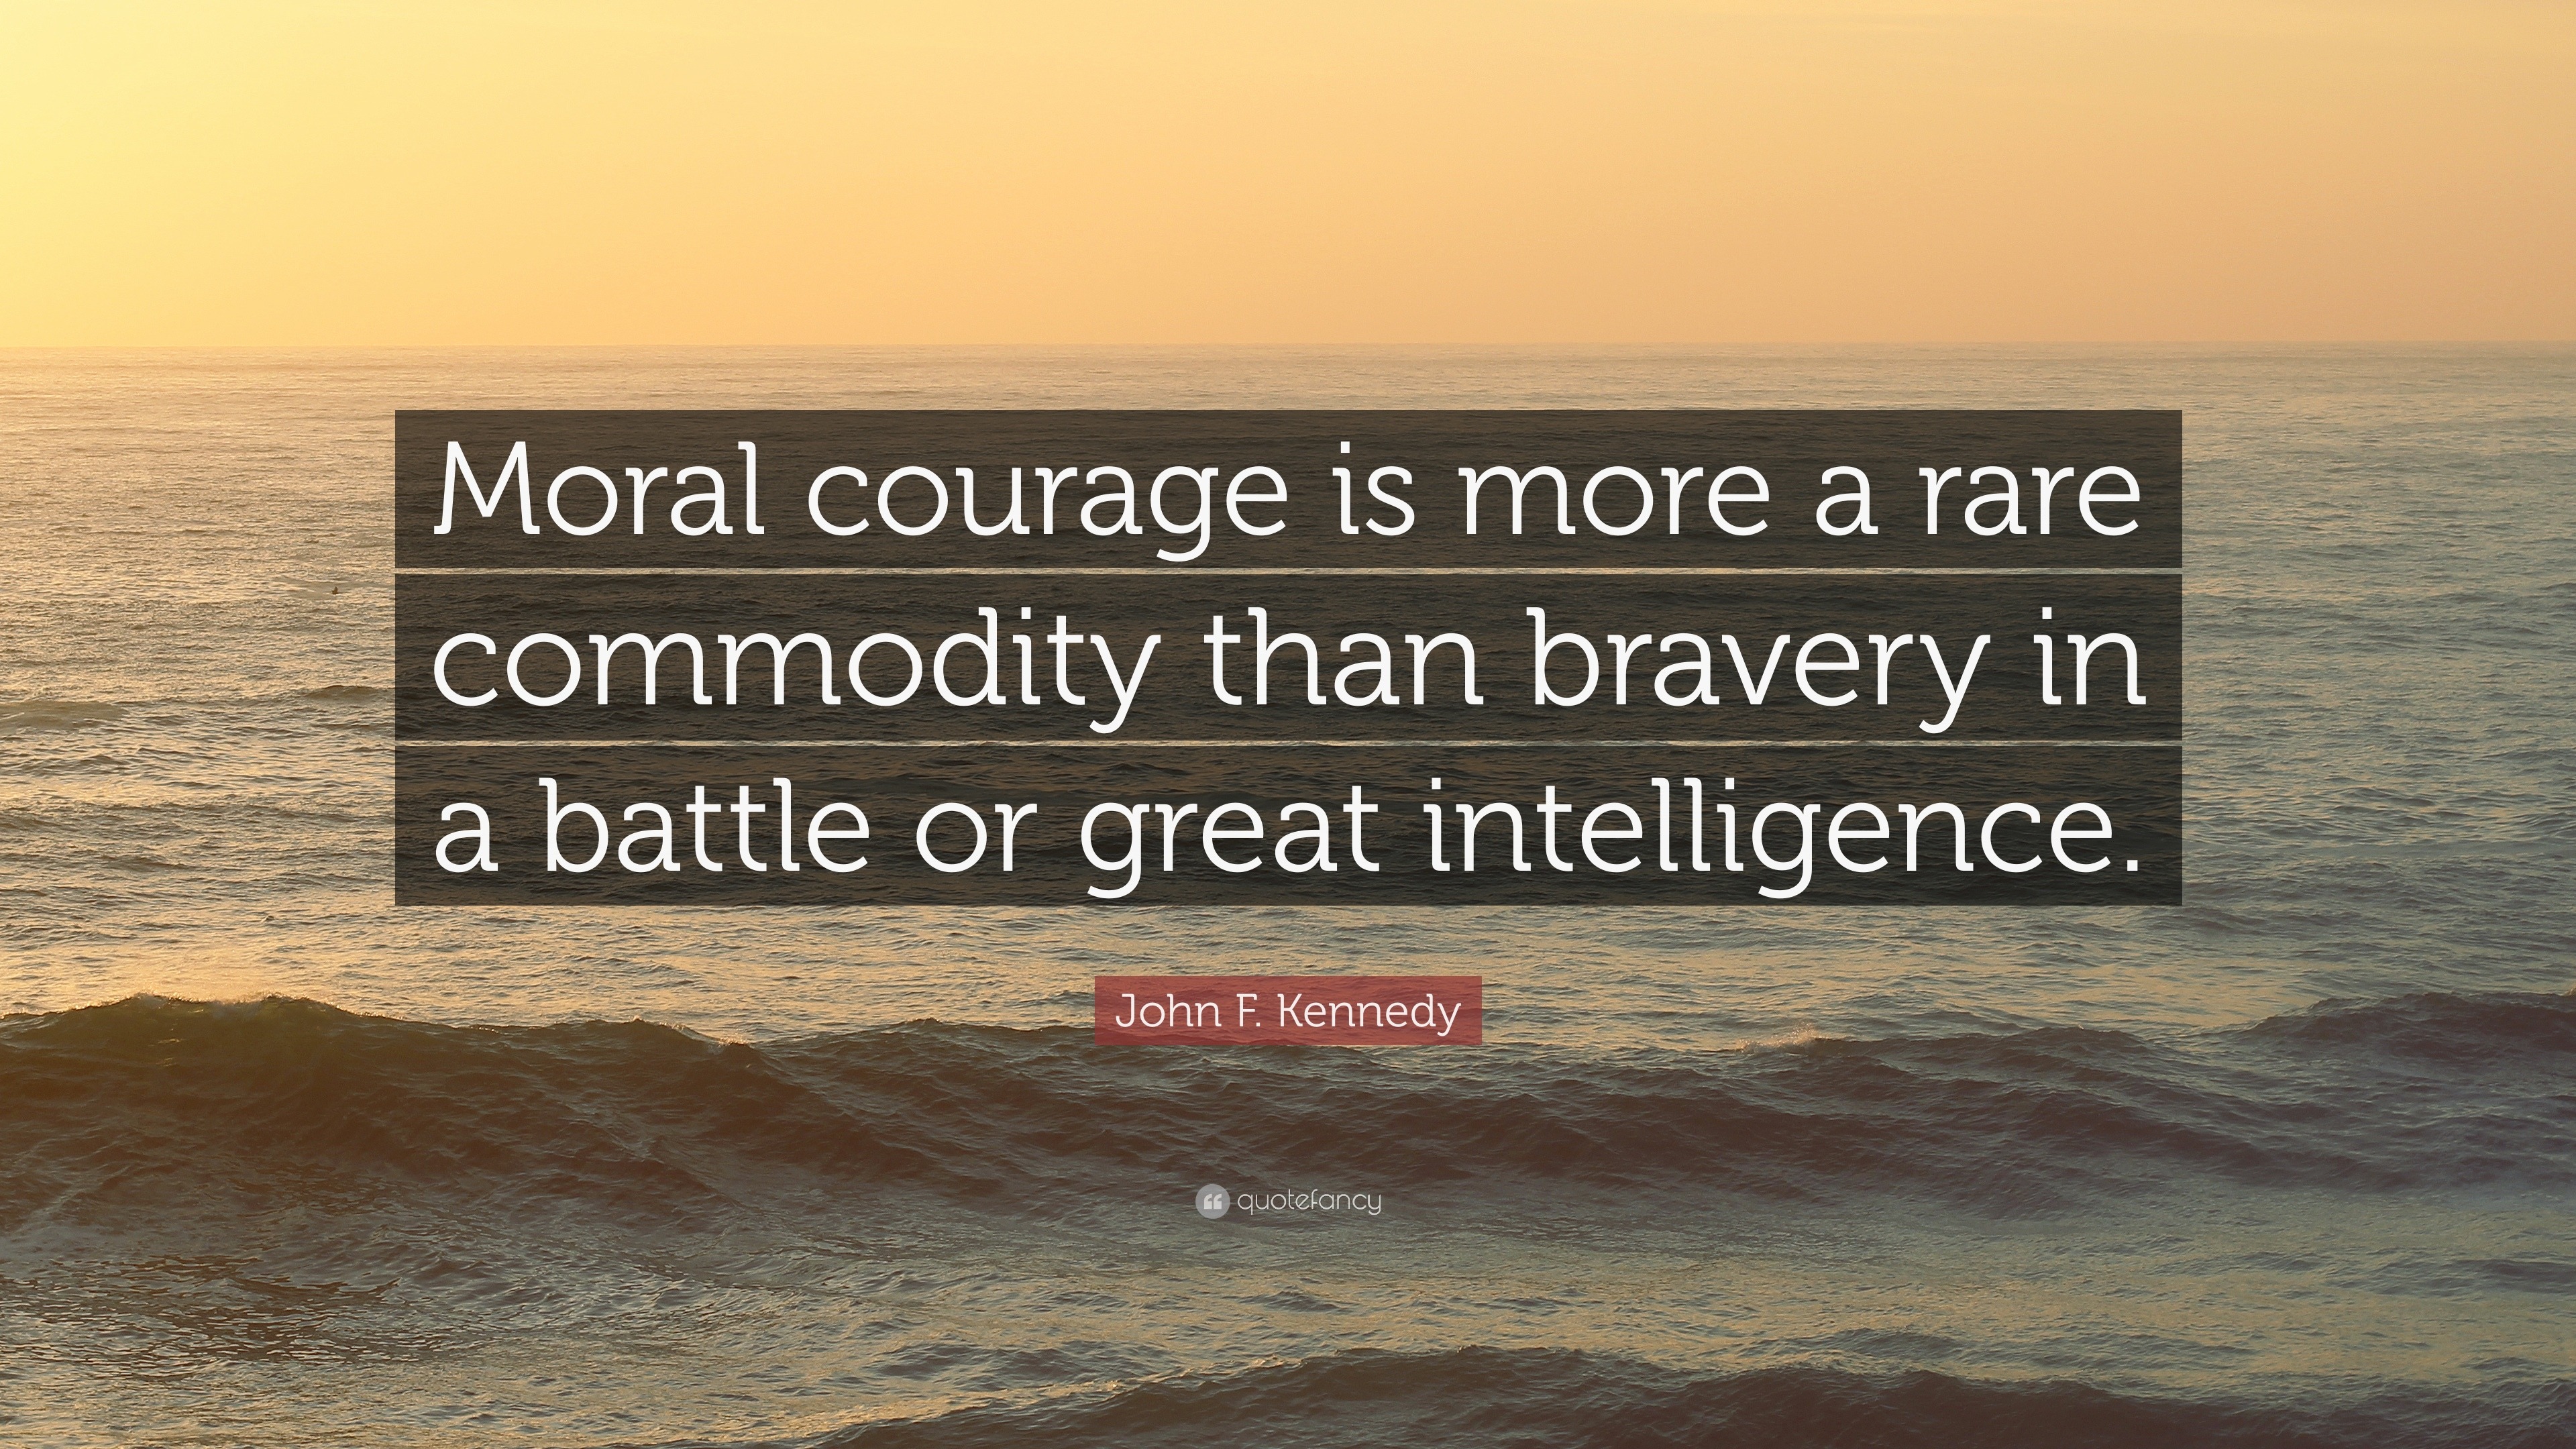 John F Kennedy Quote Moral Courage Is More A Rare Commodity Than Bravery In A Battle Or Great Intelligence 10 Wallpapers Quotefancy